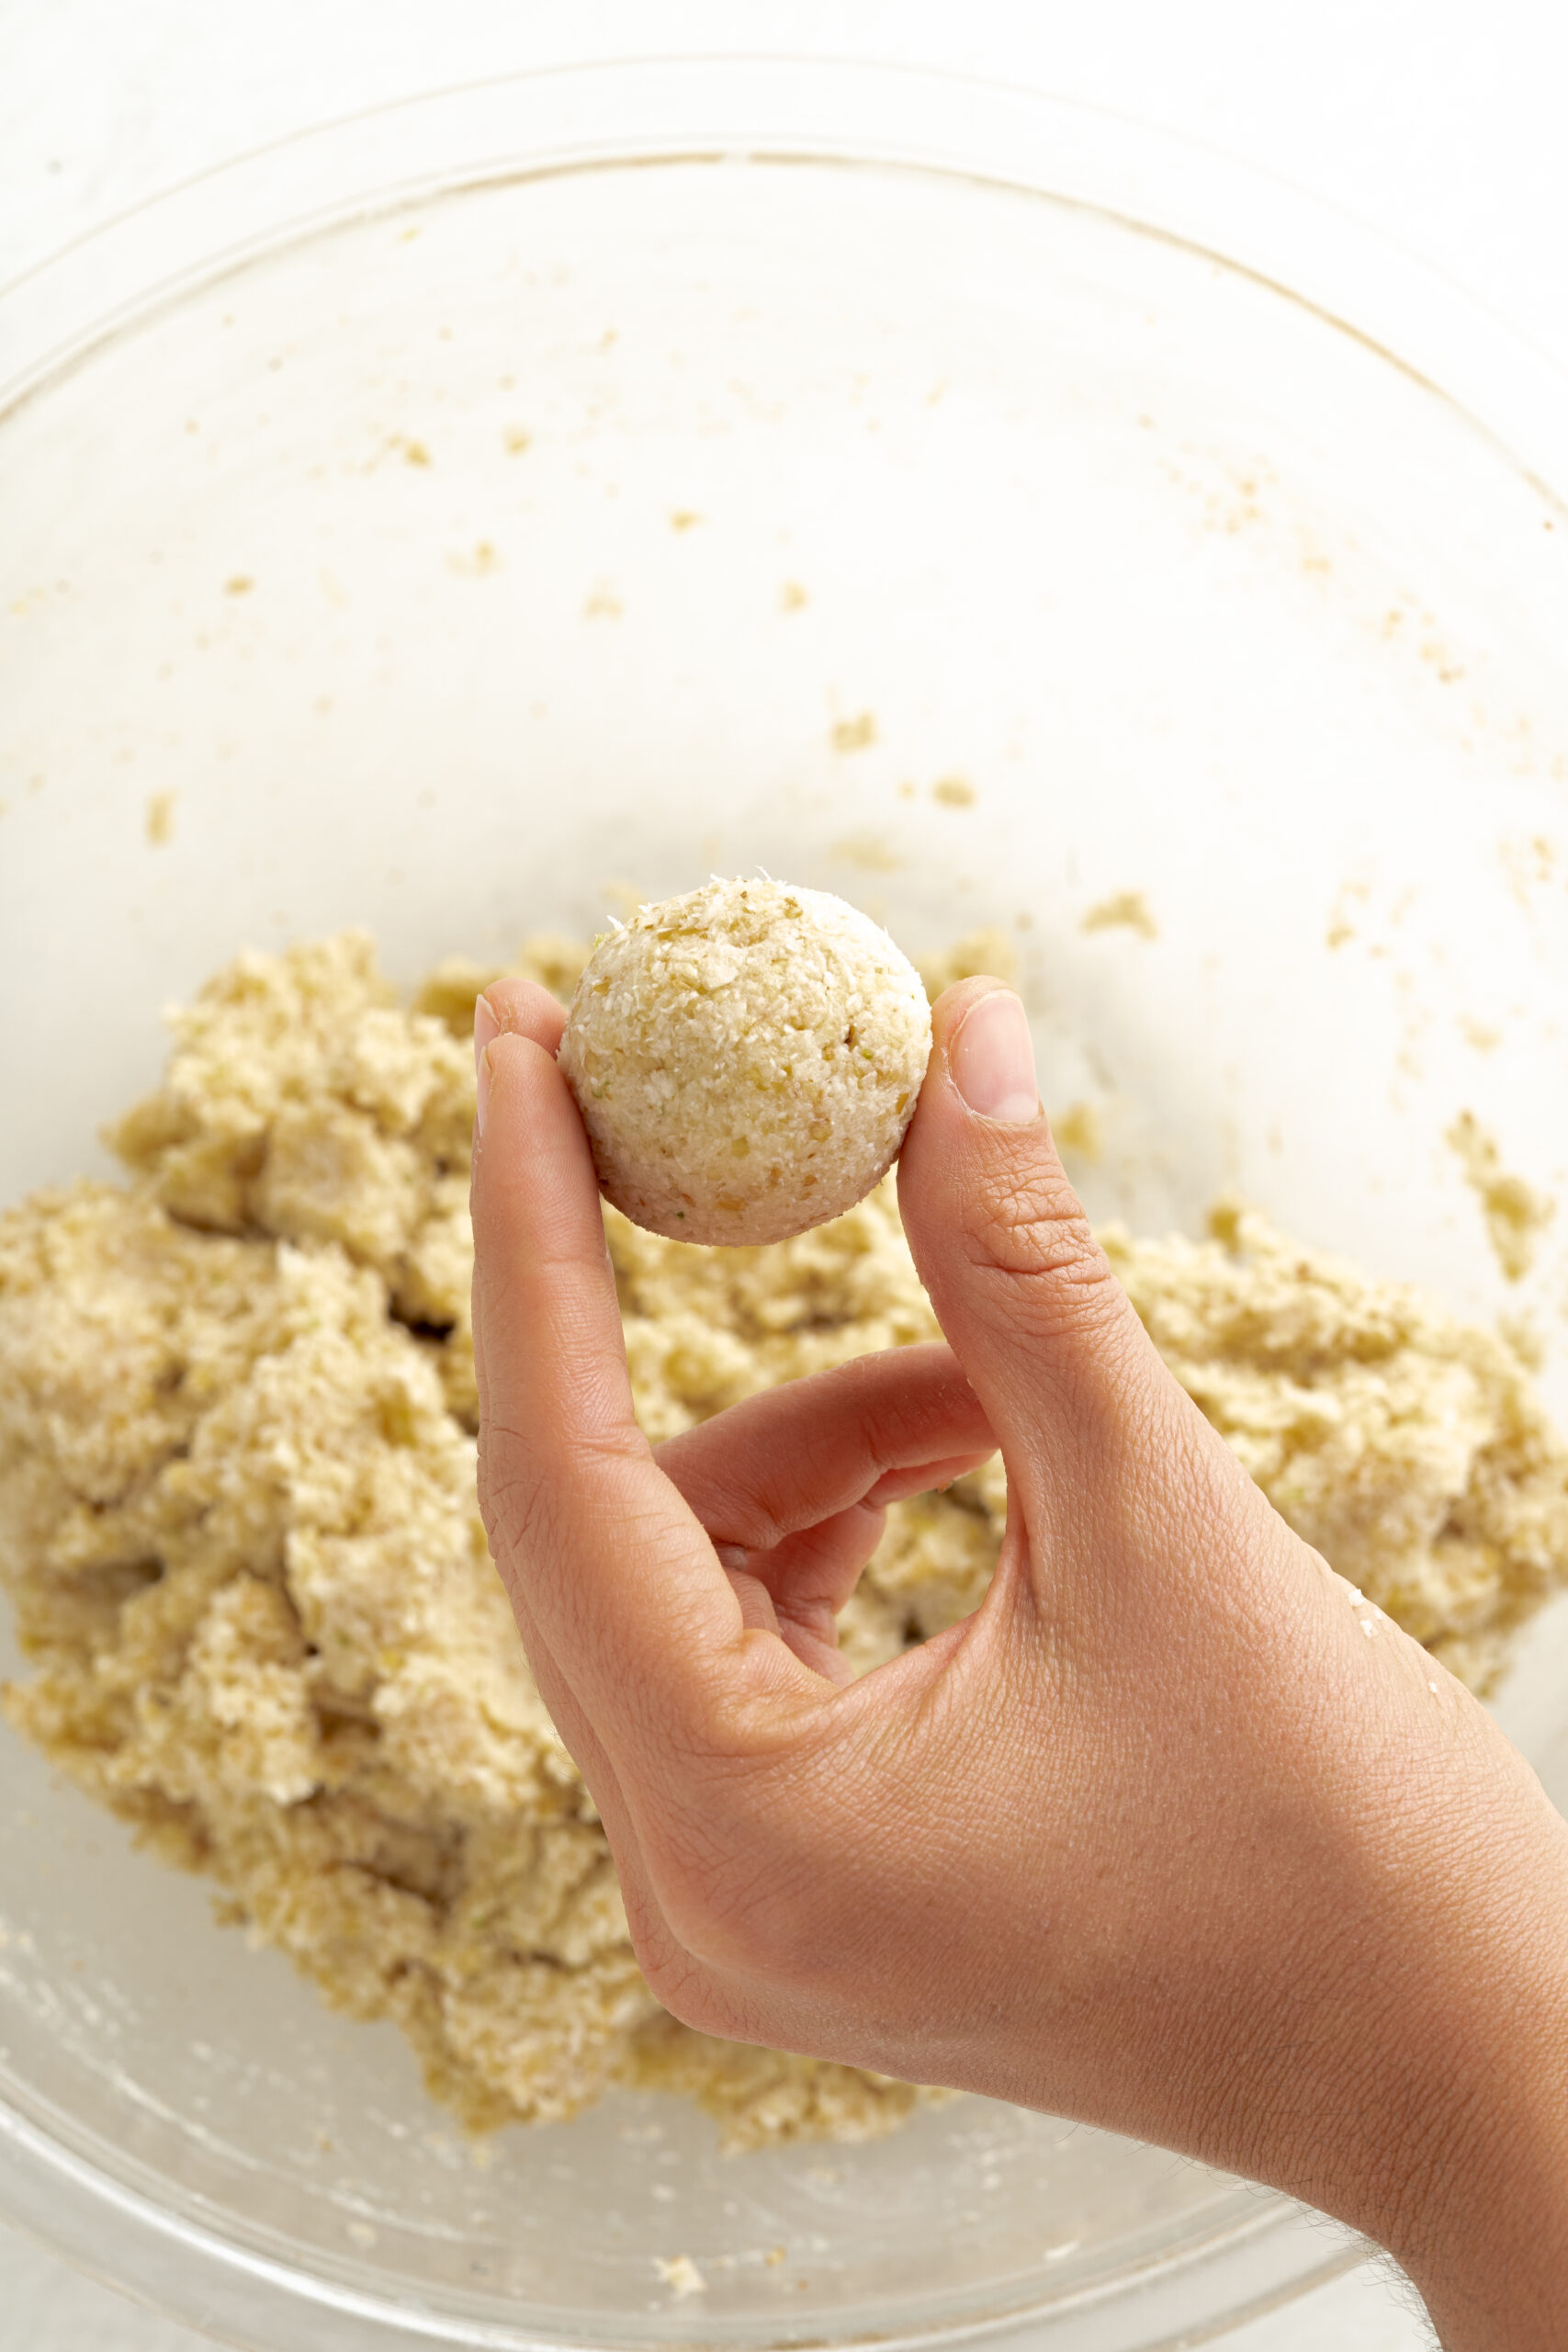 Rolling balls with truffle mixture.